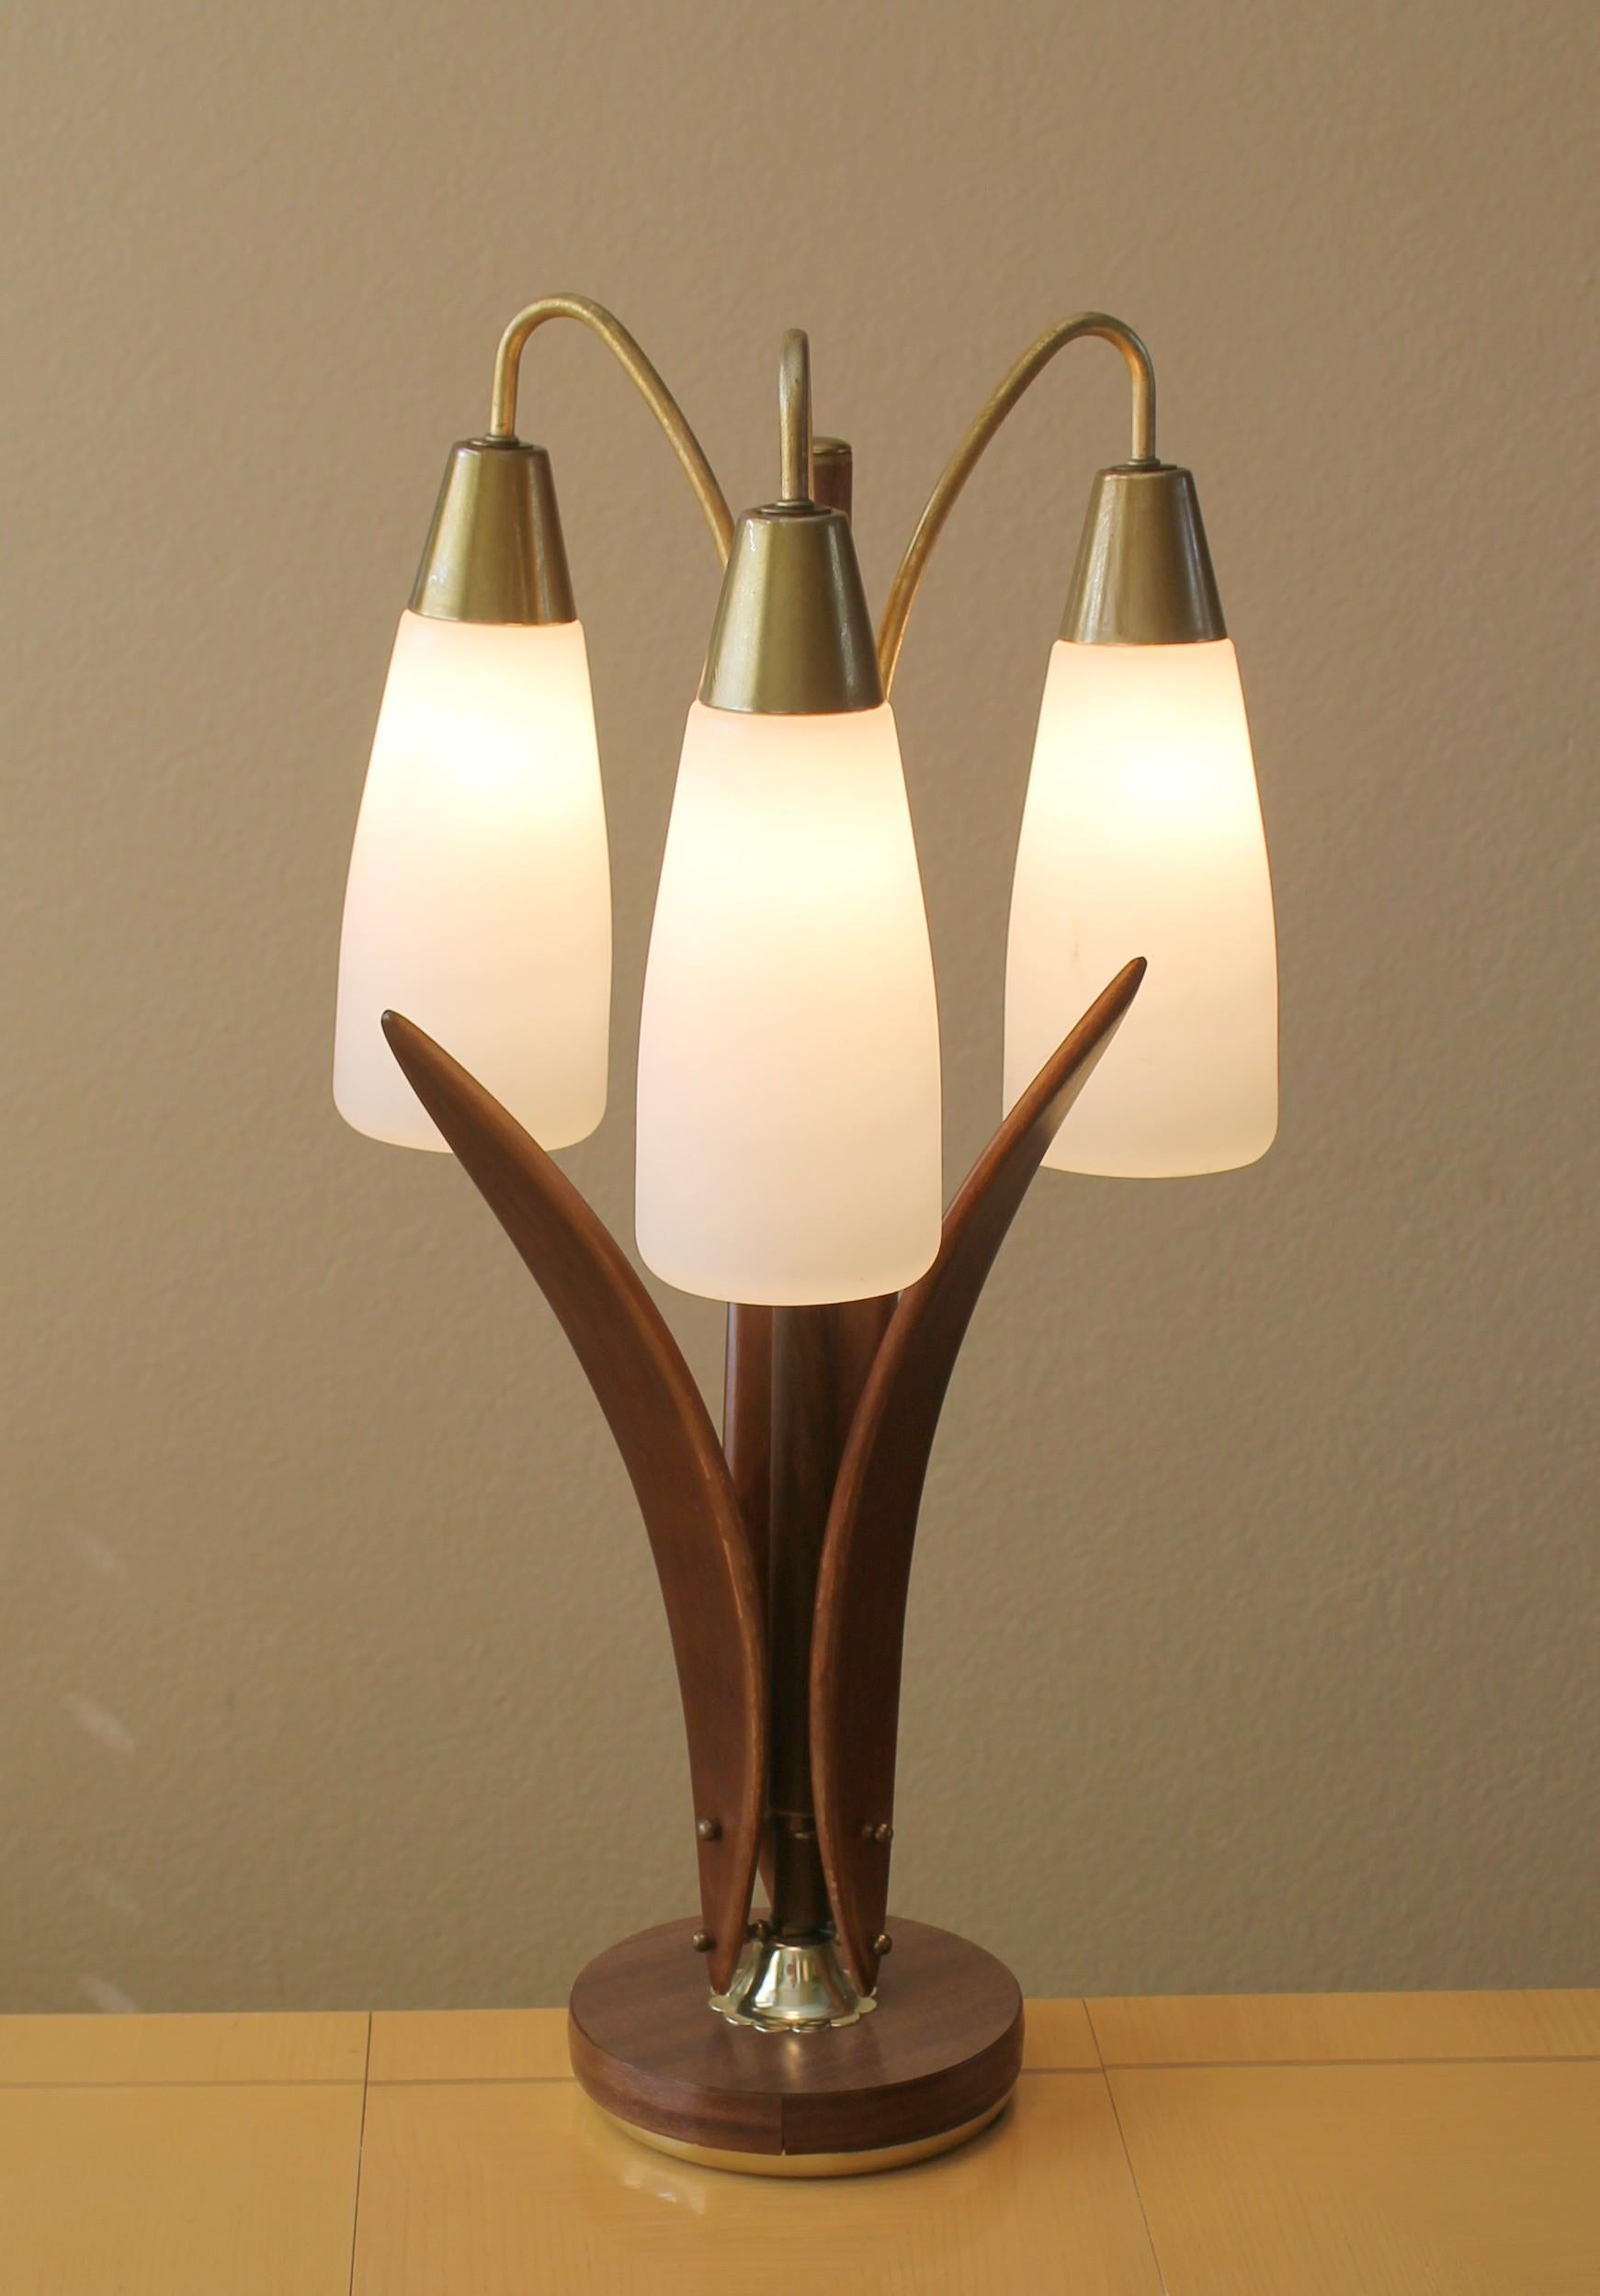 American Exquisite Danish Modern 3 Shade Glass and Walnut Lamp 1950s Mid Century Lighting For Sale